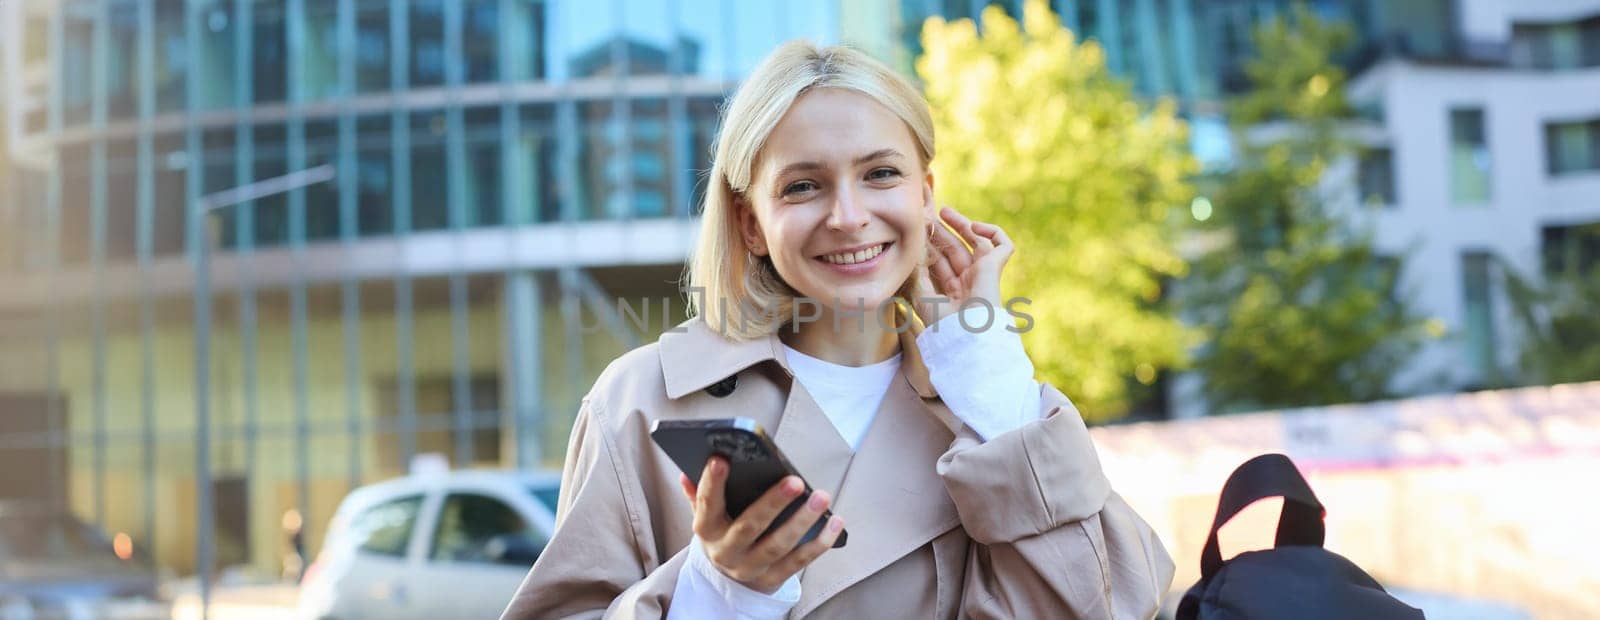 Portrait of carefree smiling woman on street, holding mobile phone, tuck hair behind ear and looking happy at camera, waiting for someone outside.